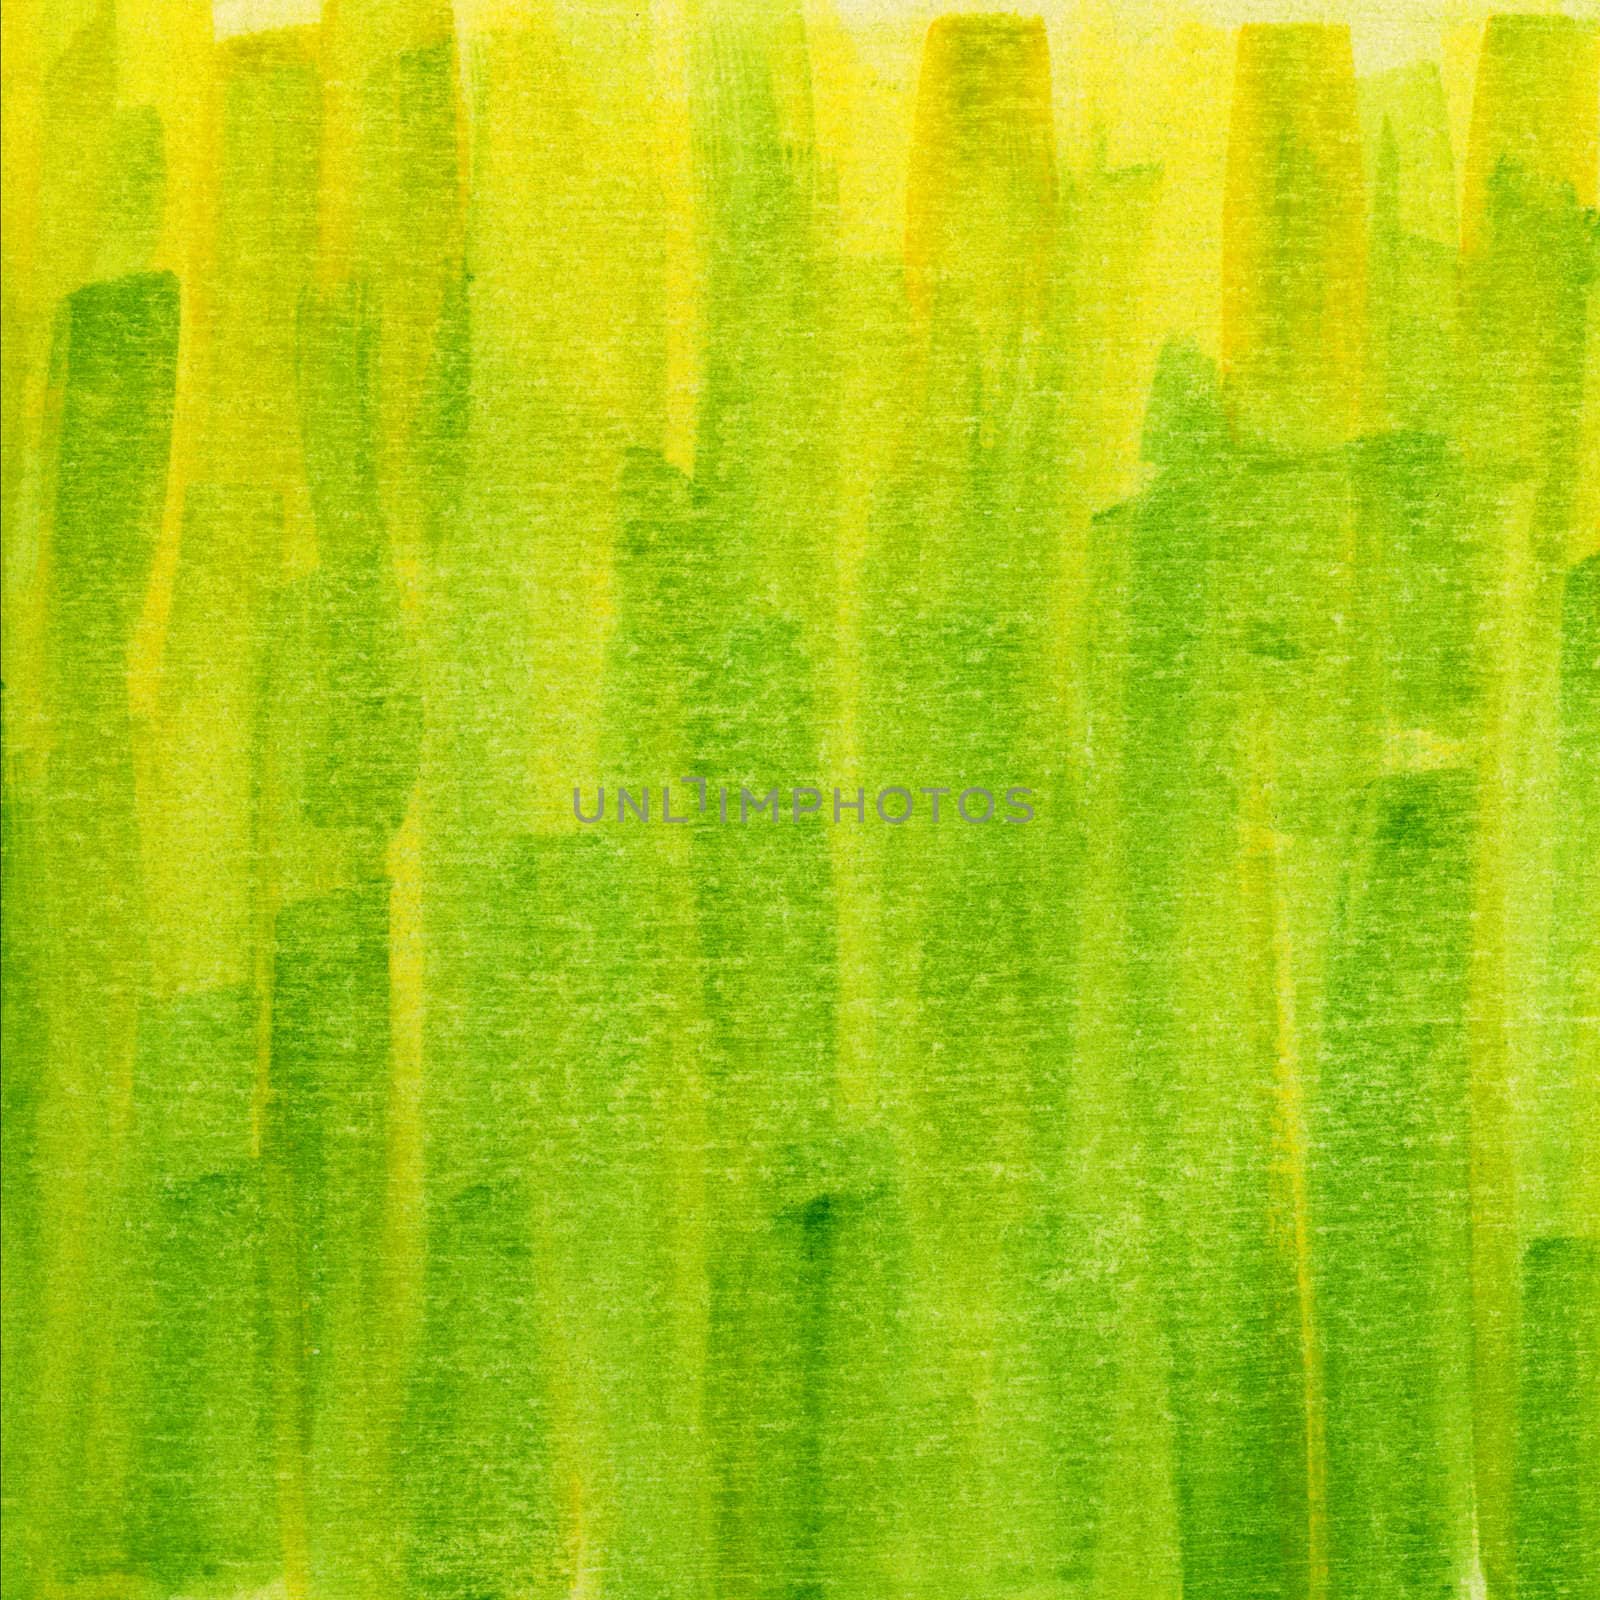 green and yellow grunge painted watercolor paper texture by PixelsAway